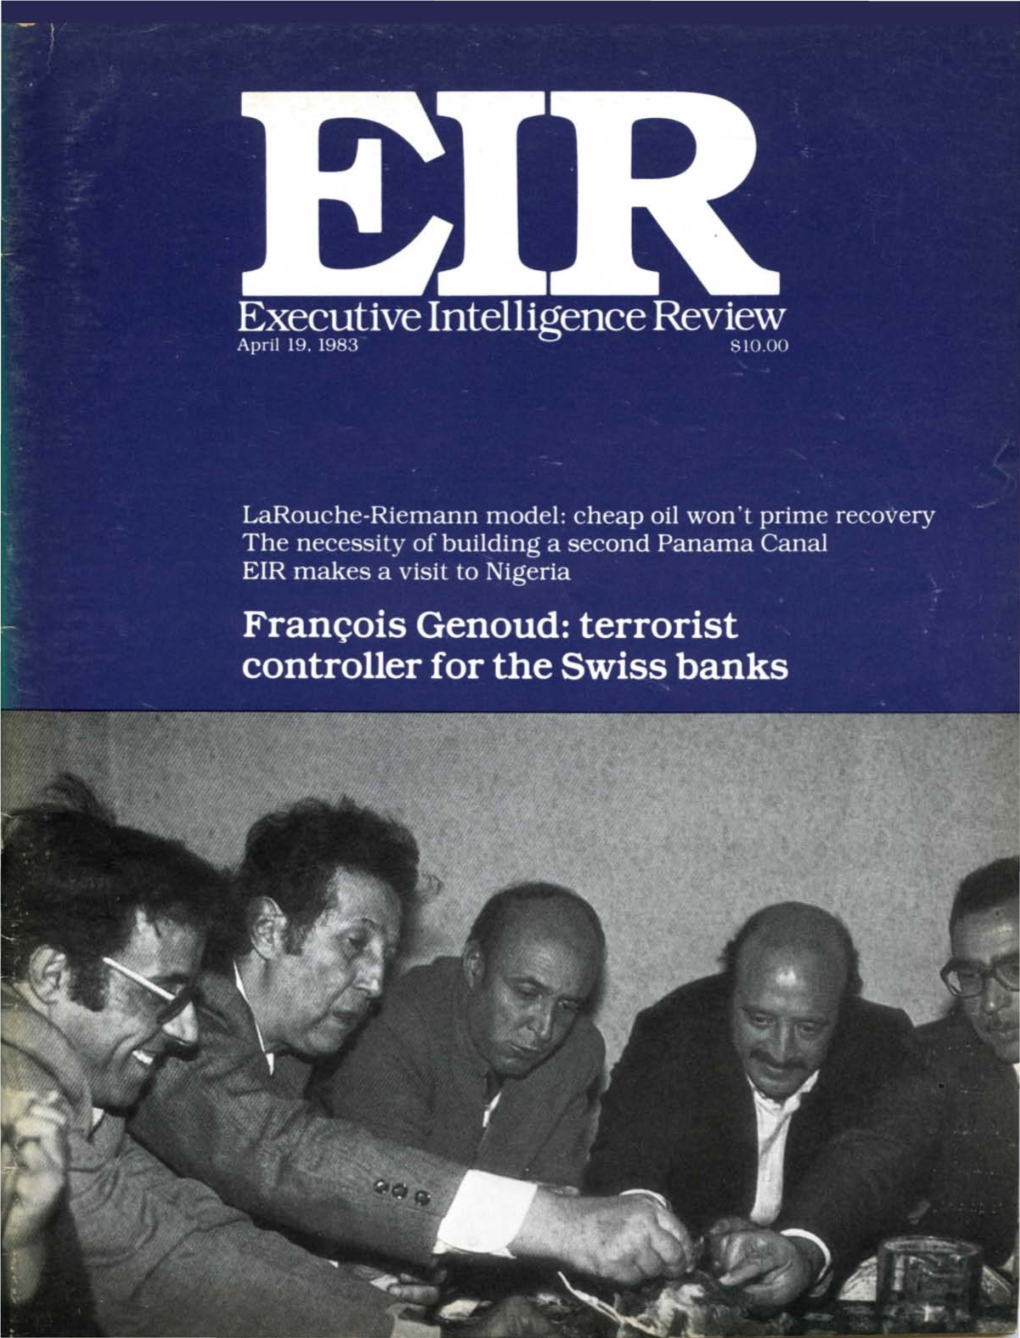 Executive Intelligence Review, Volume 10, Number 15, April 19